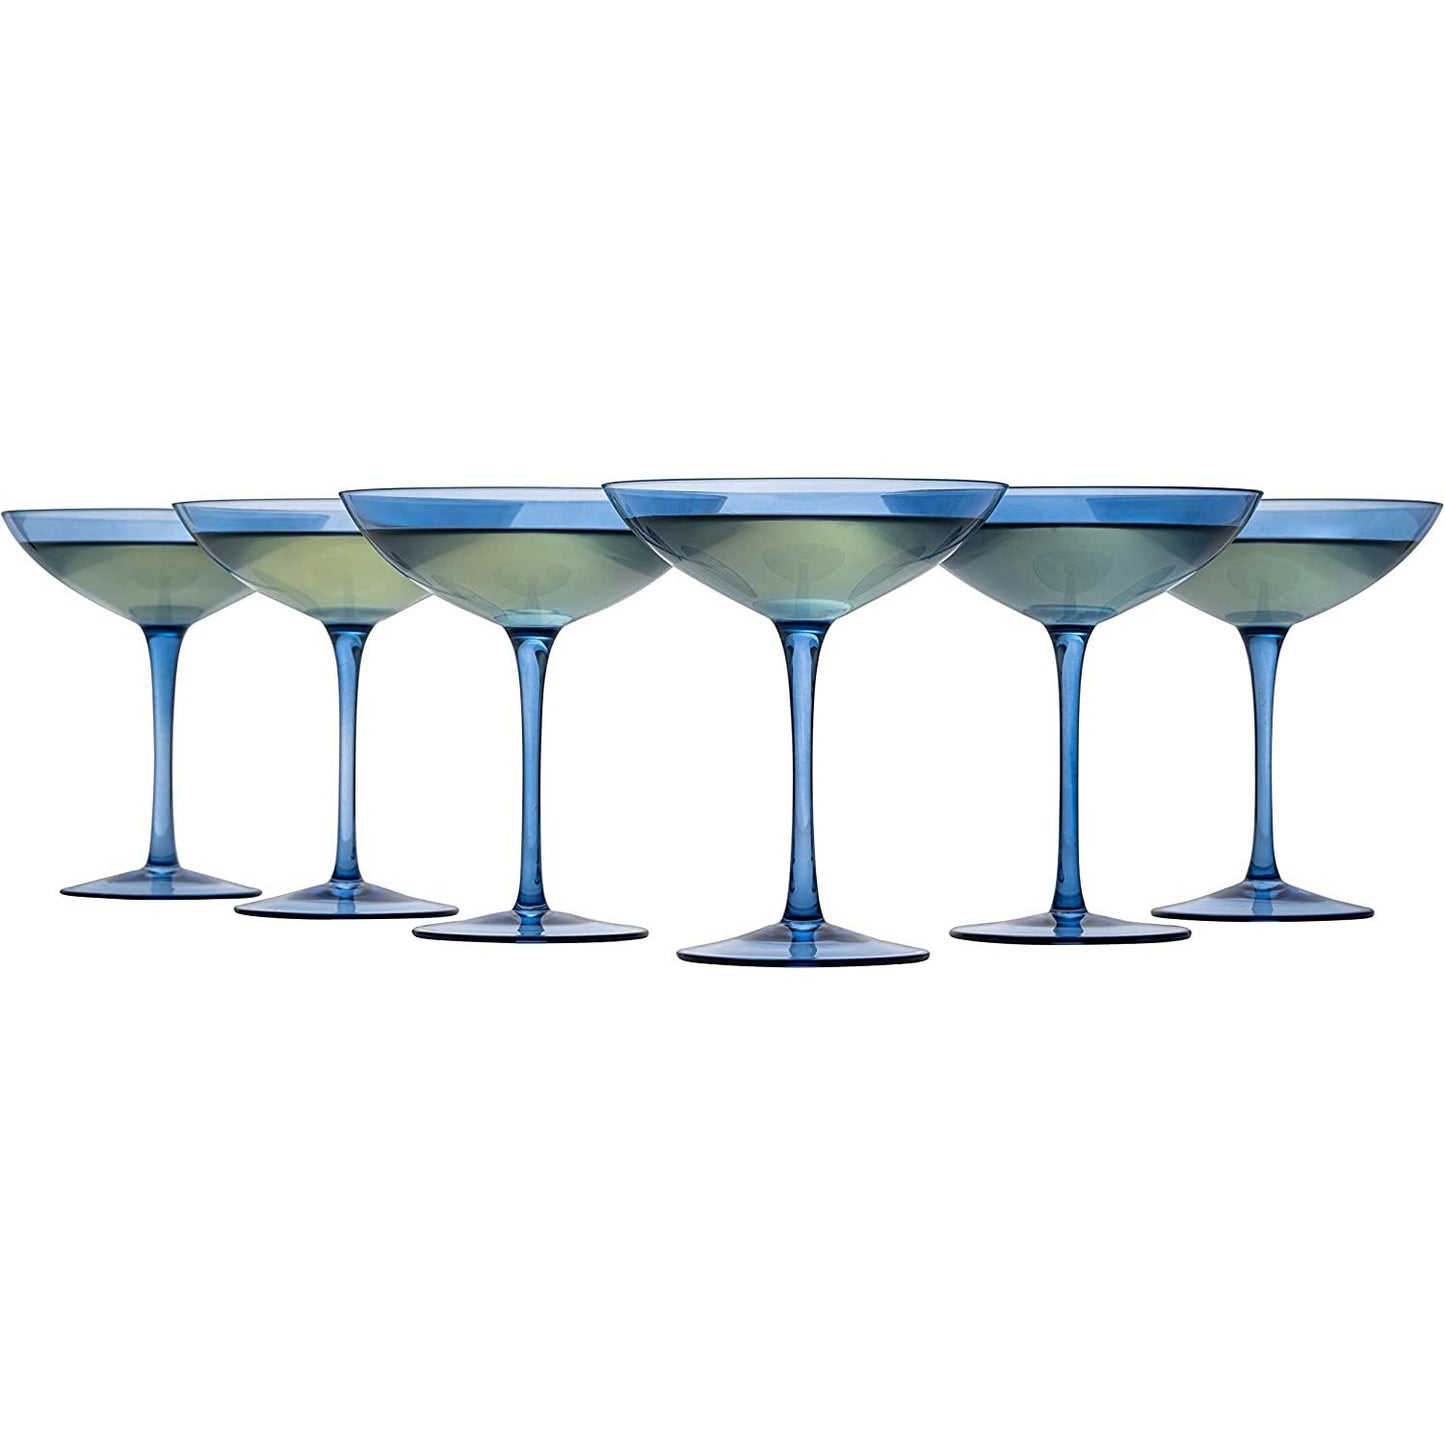 Cobalt Blue Colored Champagne Coupe Glasses 12oz Set of 6 by The Wine Savant - Toasting Glasses, Wedding Party Champagne Cocktail Blue Champagne Colored Glasses Prosecco, Mimosa, Home Bar Glassware-5